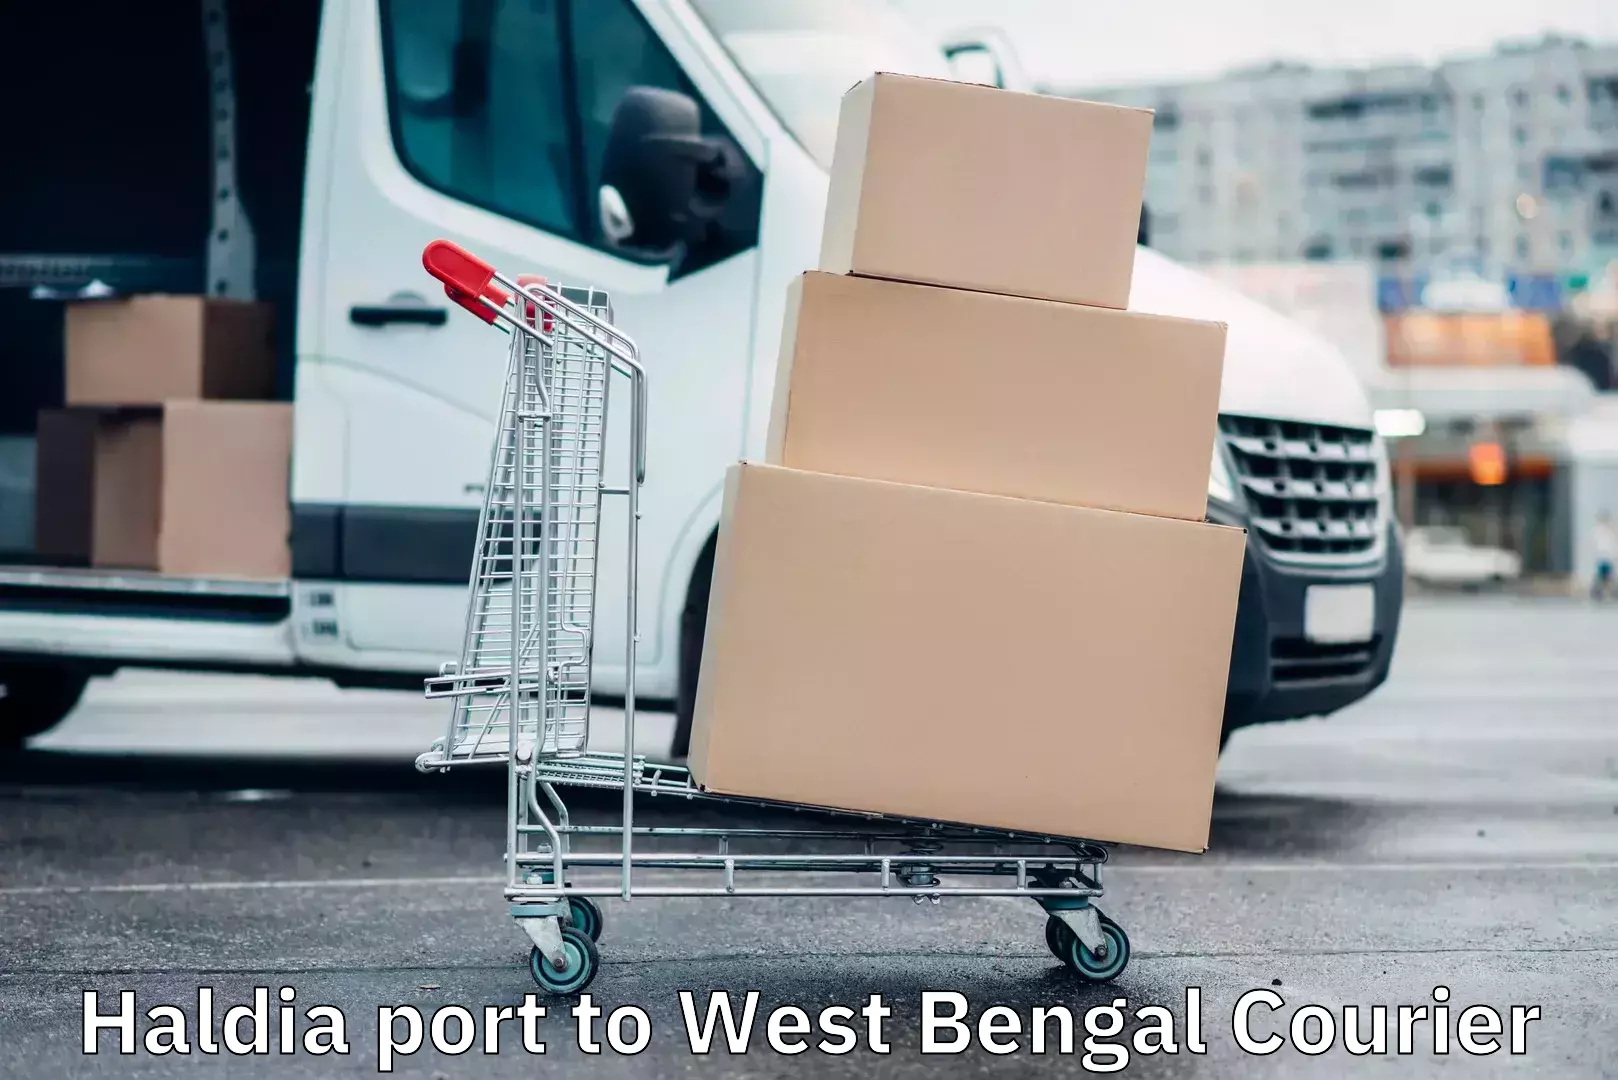 Trackable shipping service Haldia port to Hooghly